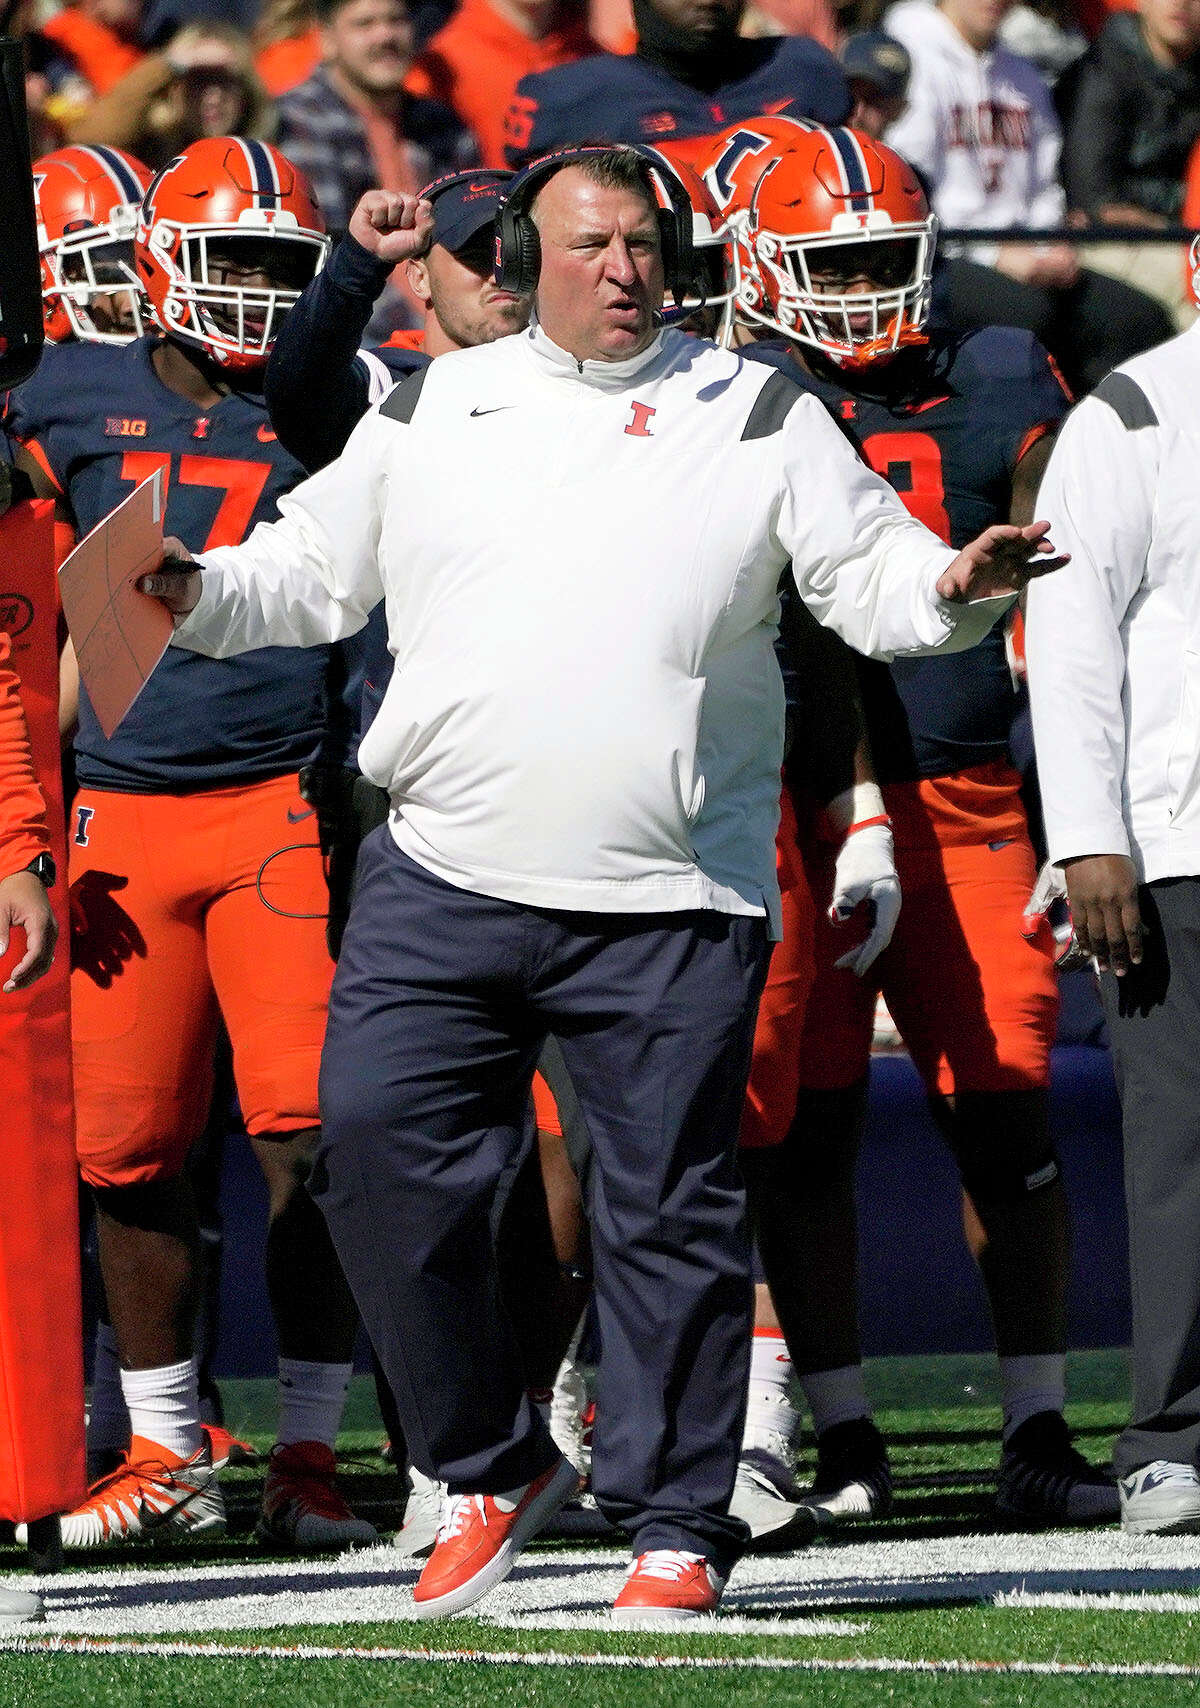 Illinois coach Bret Bielema gestures on the sideline during a win over Minnesota earlier this season at Memorial Stadium in Champaign.